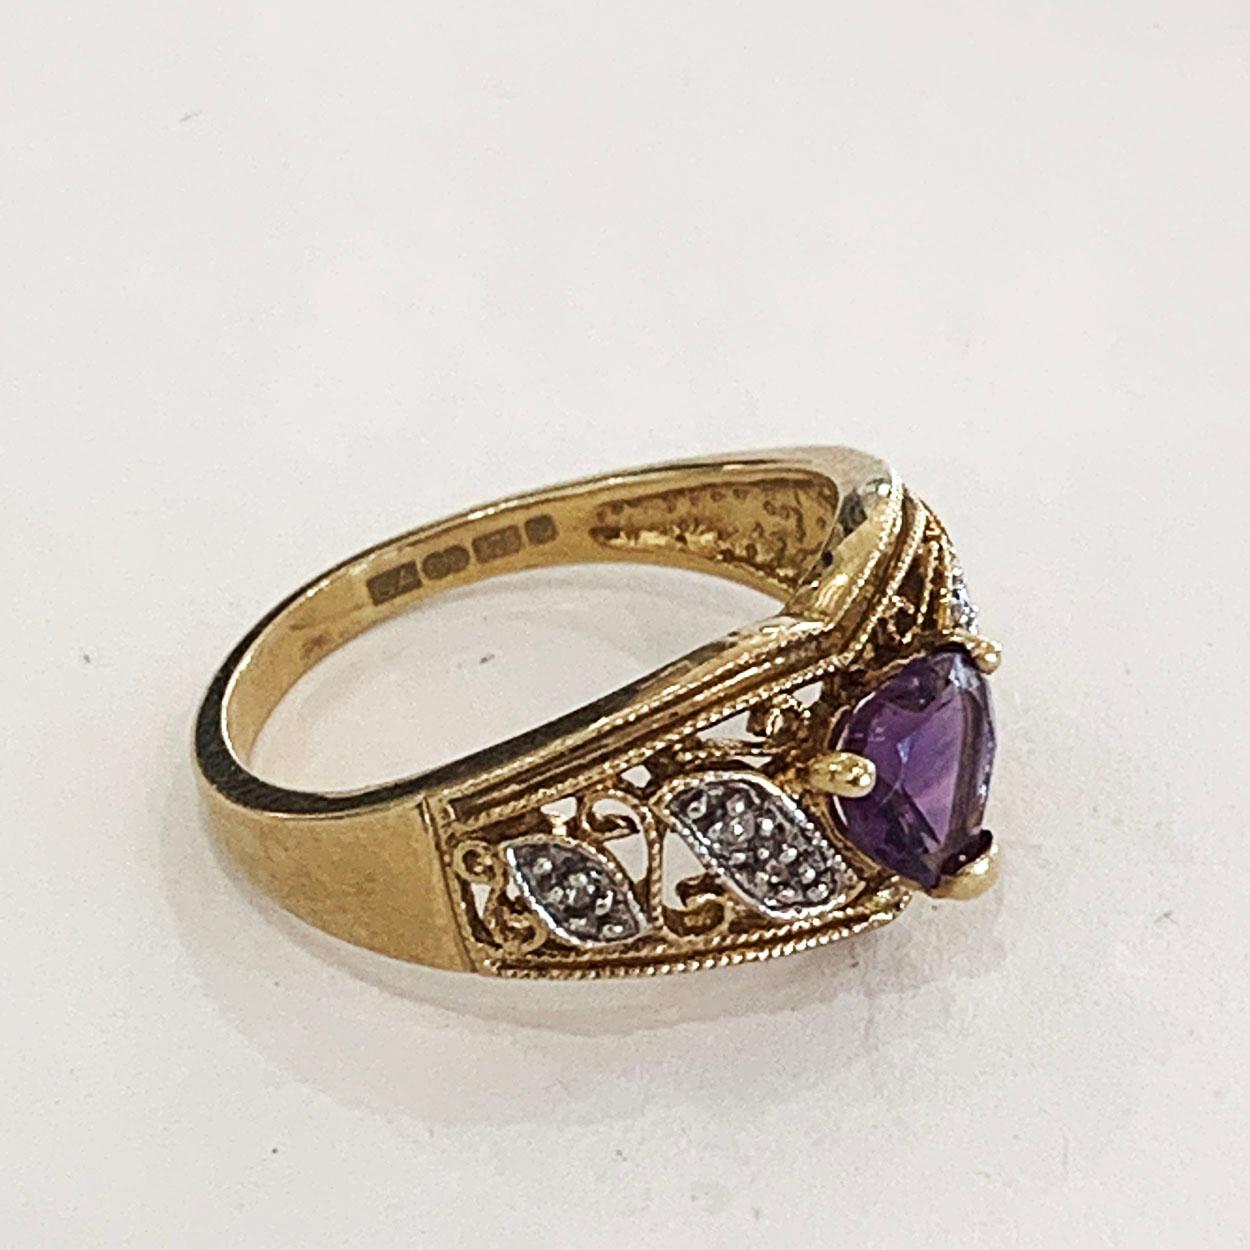 Vintage 9ct Gold Ring, set with Heart shape Amethyst with two leaves in white gold to each shoulder, set with one and two Diamonds  respectively. The band has internal hallmarks indicating England, and has 375 confirming the 9ct gold content plus